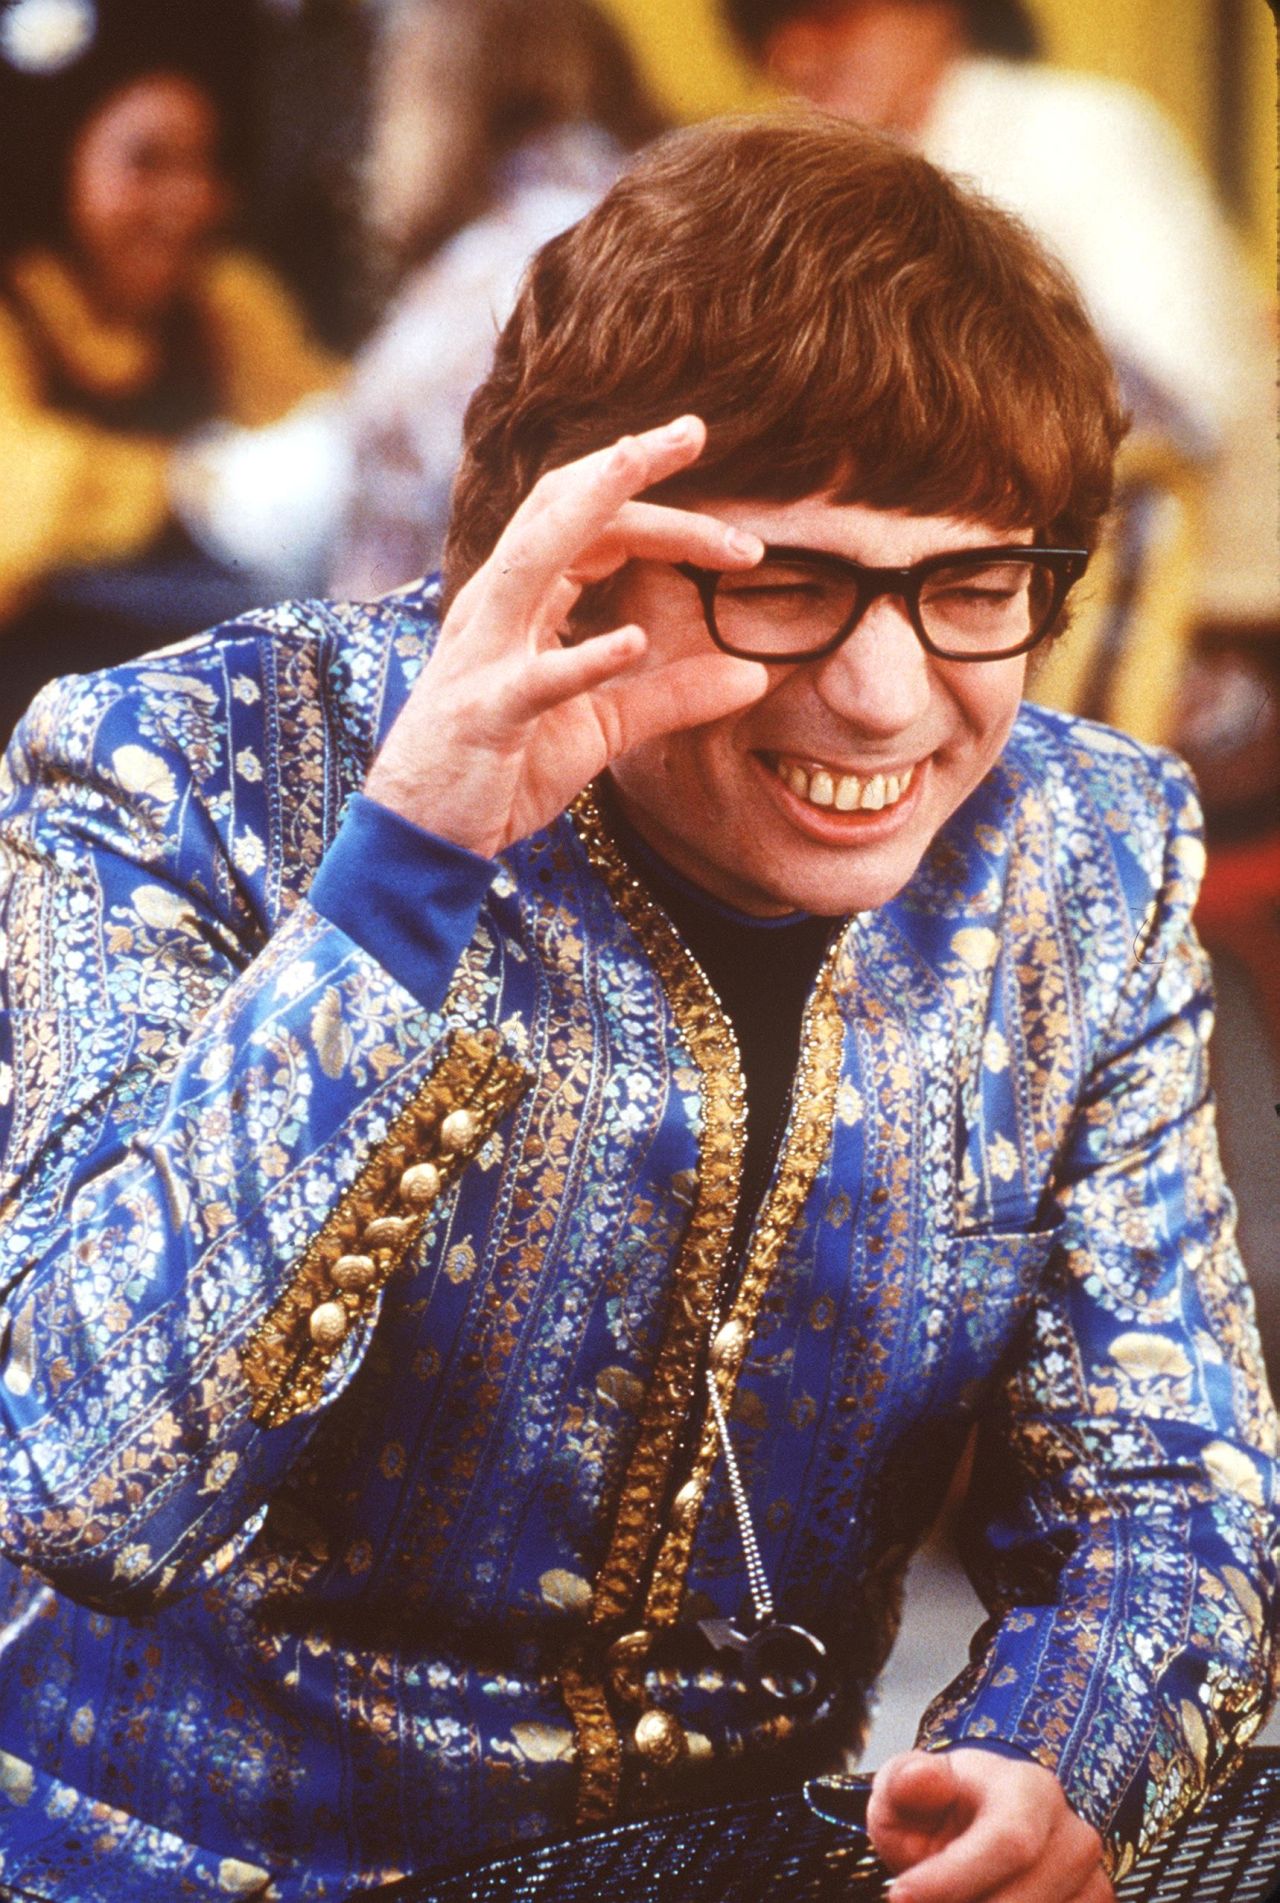 <strong>"Austin Powers: The Spy Who Shagged Me": </strong>Mike Myers reprises his role as the ladies man British spy in this sequel to the hit 1997 film "Austin Powers: International Man of Mystery." <strong>(HBO Now) </strong>